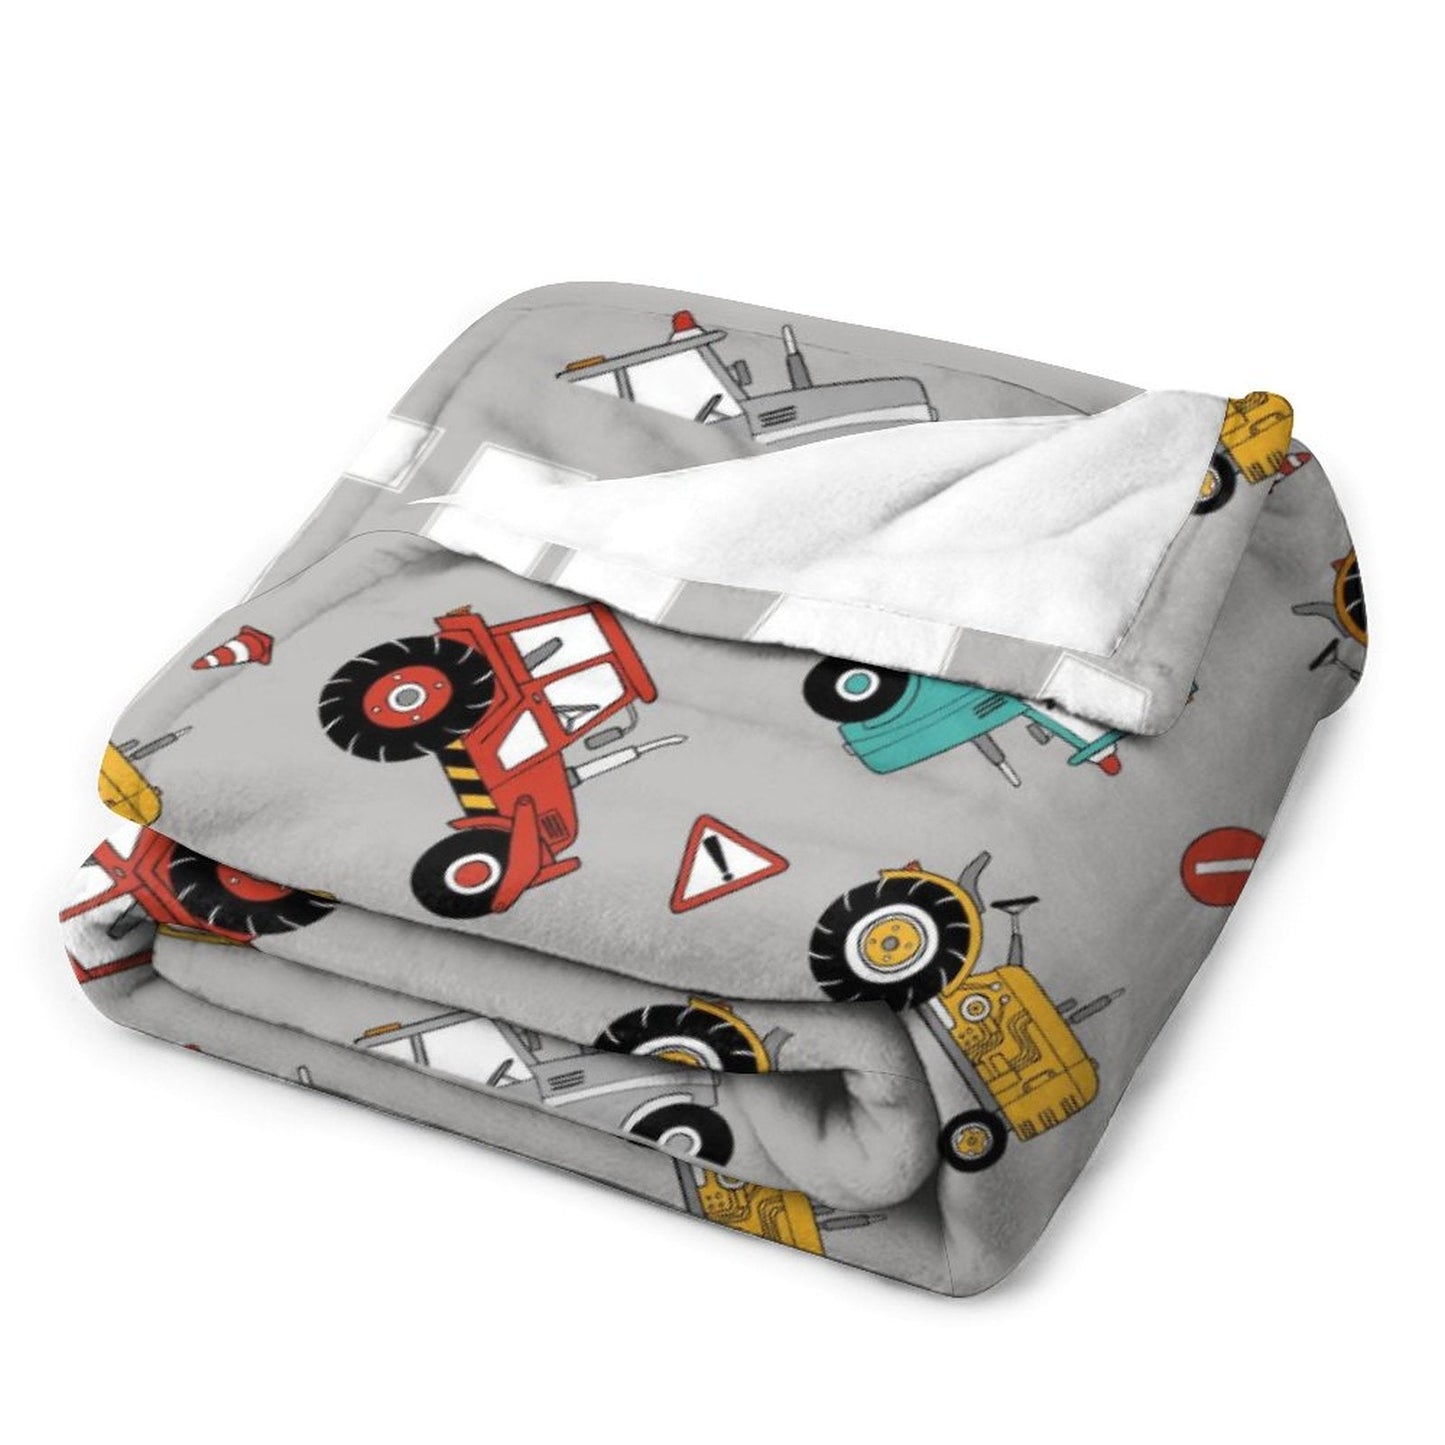 ️Personalize Cool Truck Car Tractor Kids Blanket for Boys